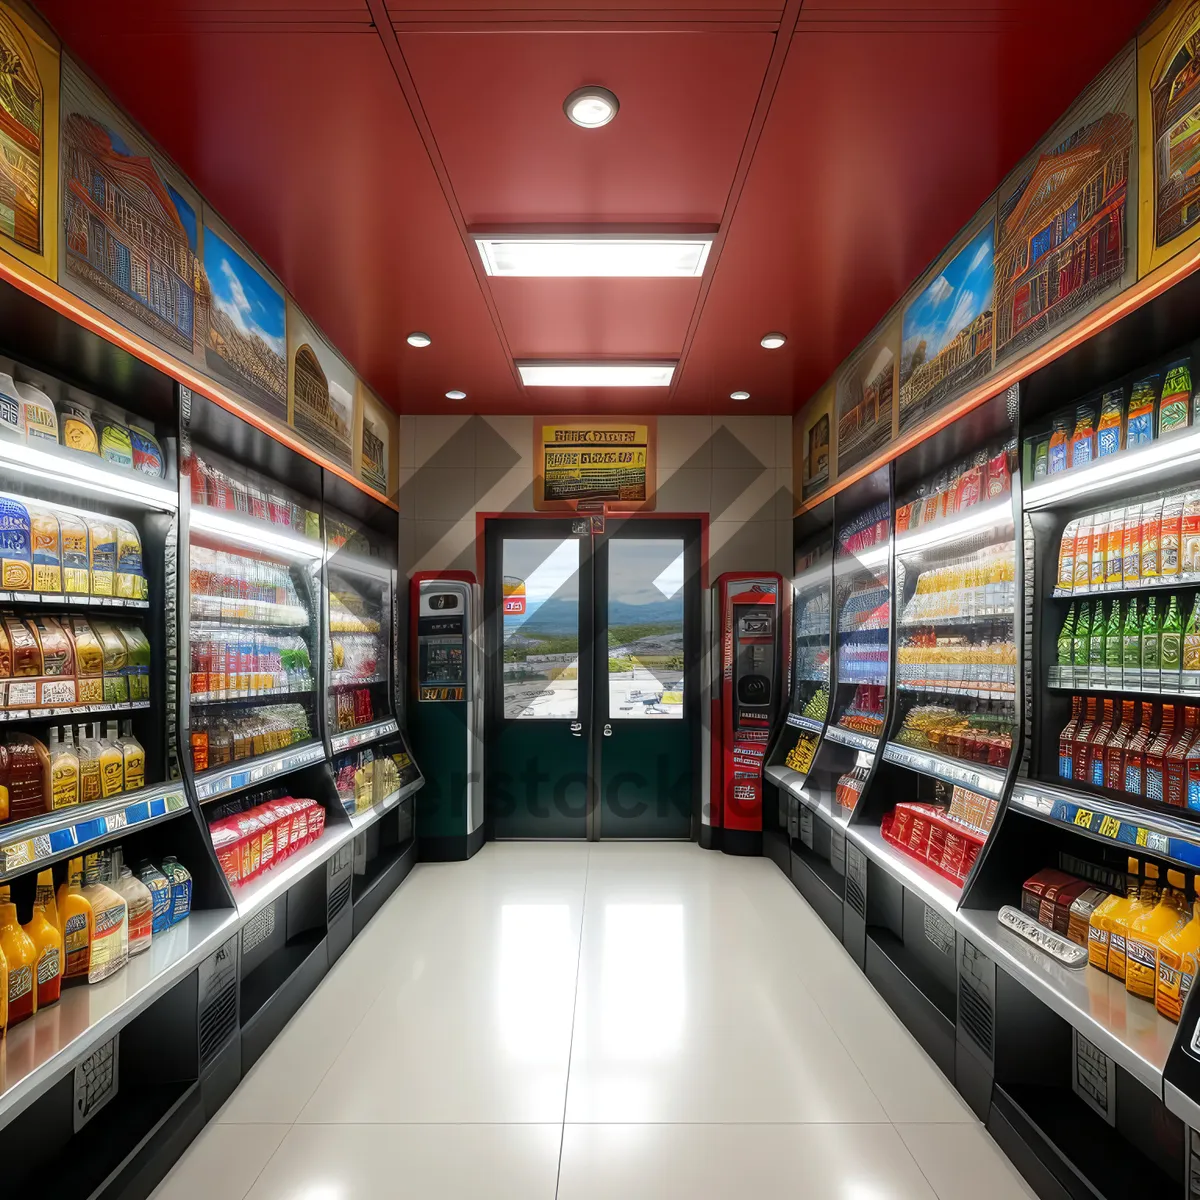 Picture of Modern Supermarket Interior with Well-Stocked Shelves